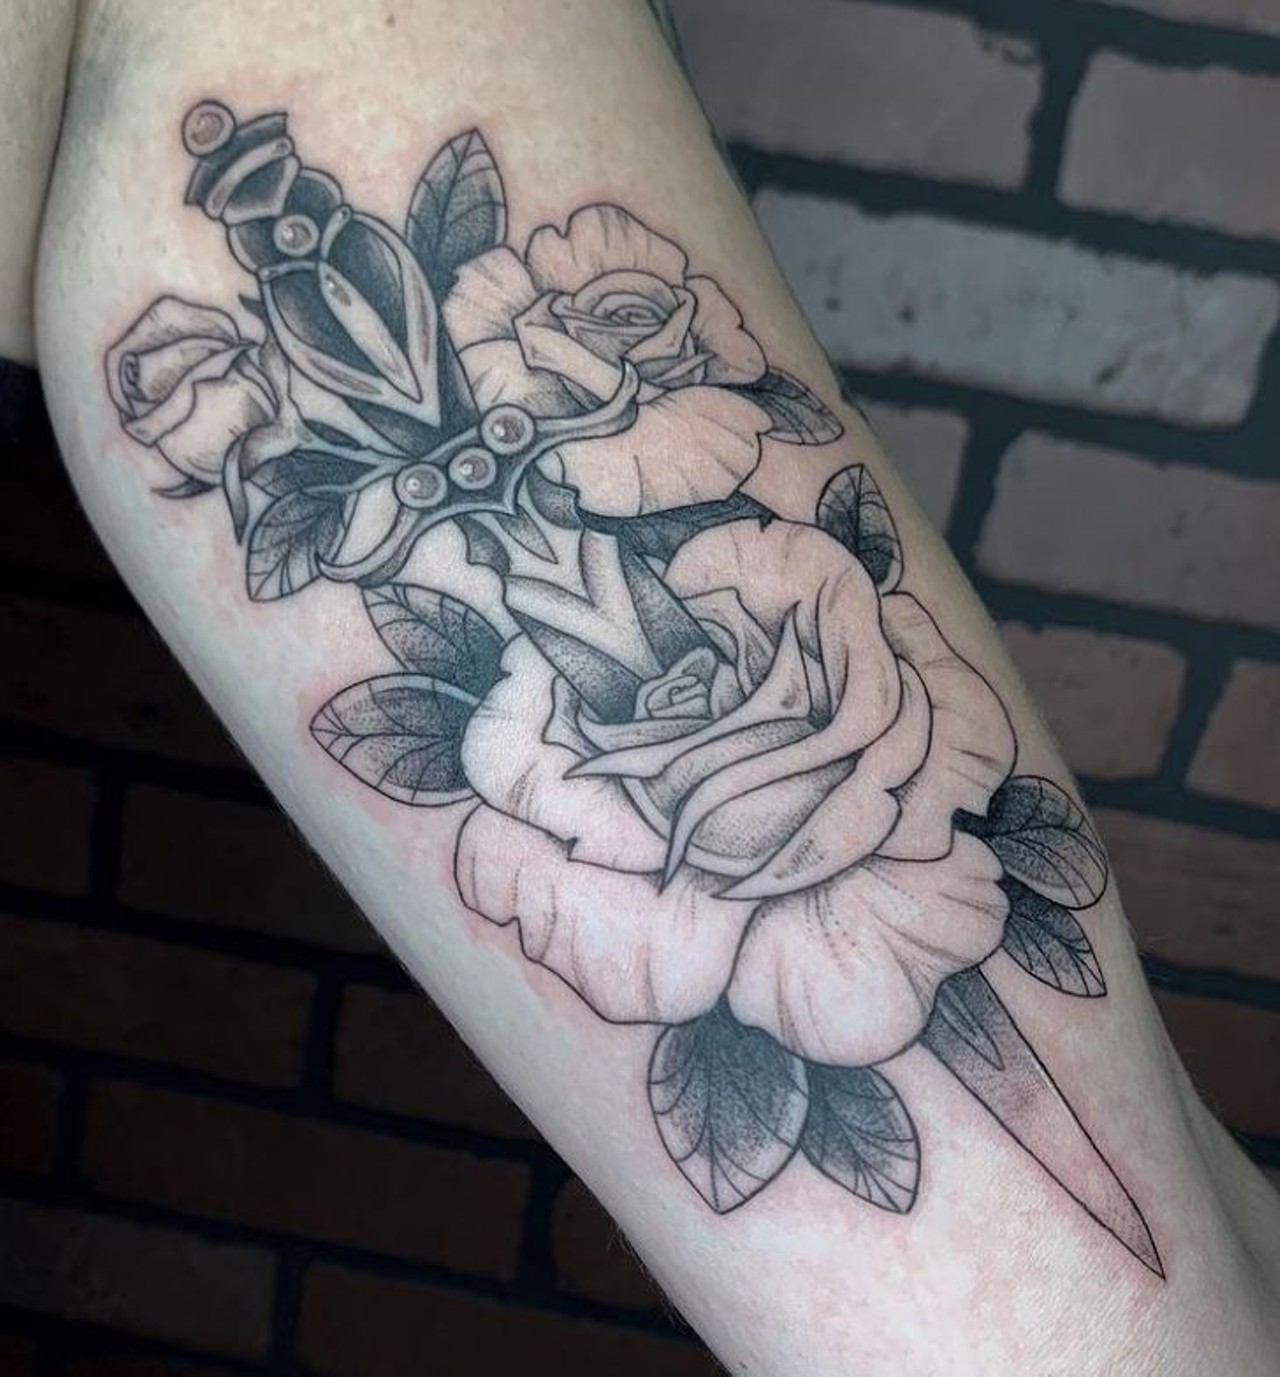 Caroline Vale 
Arlia Tattoo
1317 Florida Mall Ave., 407-250-6040
Caroline Vale is a fine-line tattoo artist who&#146;s currently working out of Arlia Tattoo. Her ultra-detailed work is perfect for animal and human portraits, although she can do it all. 
Photo via carolinev_tattoo/Instagram